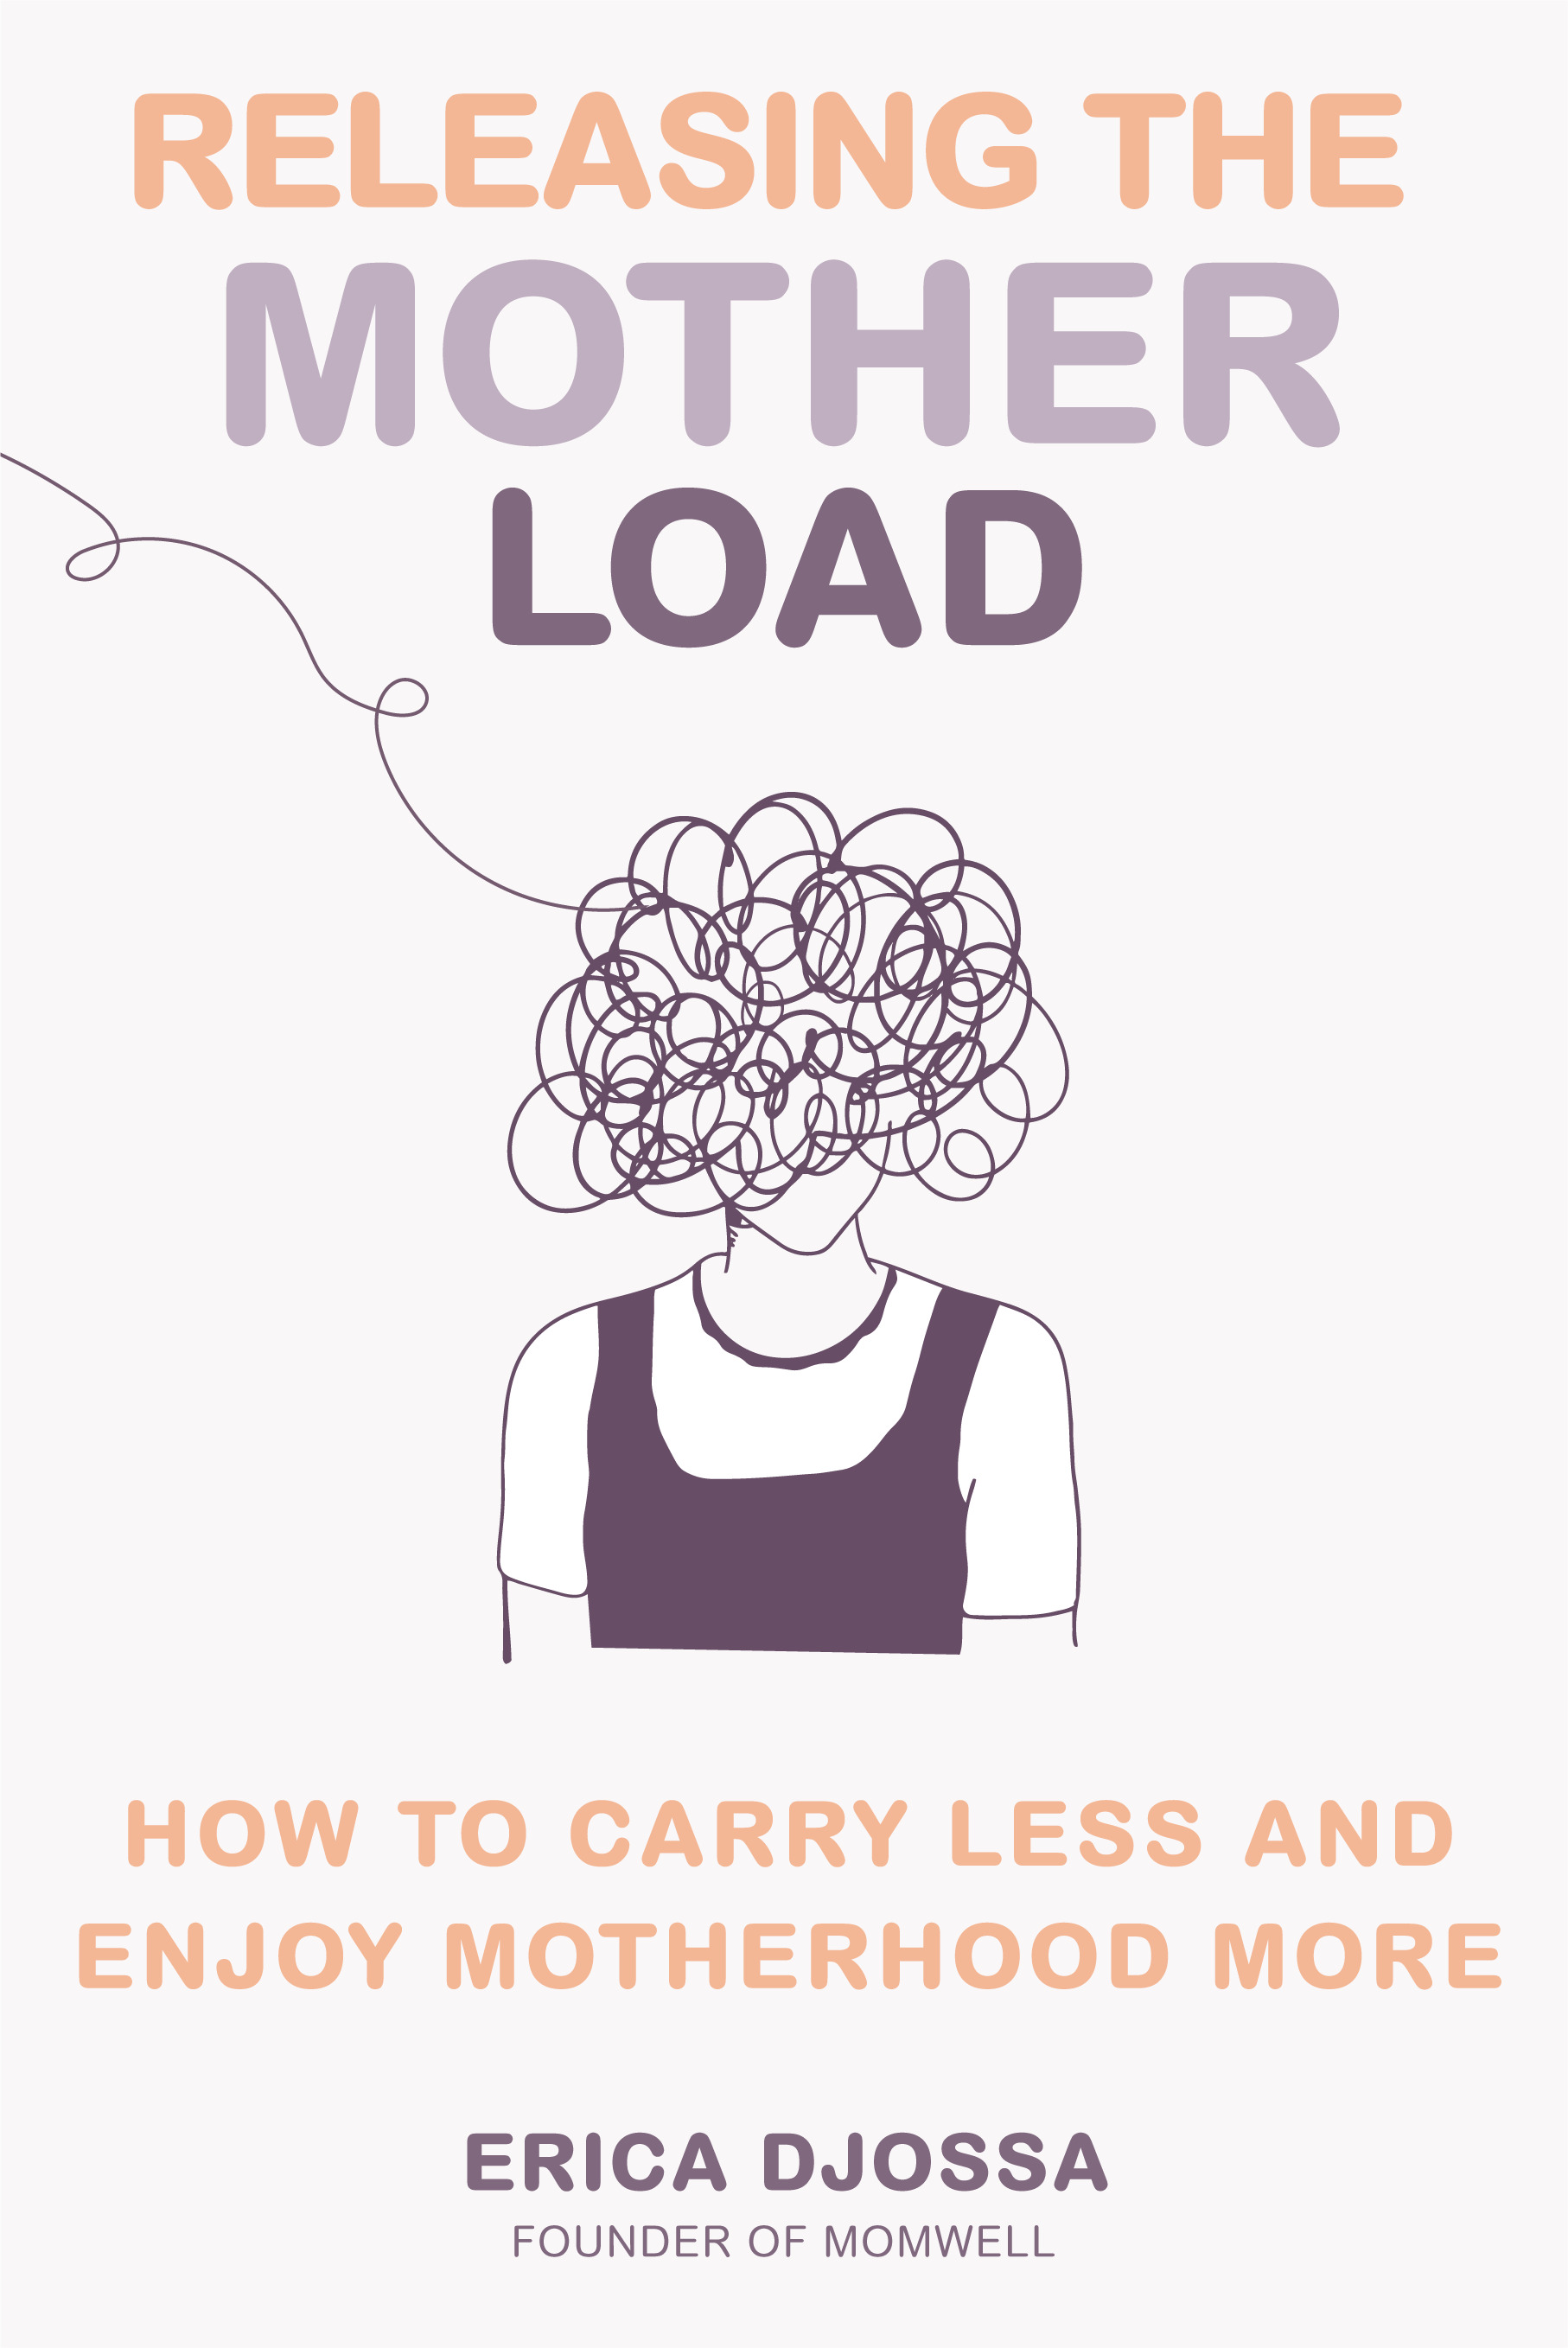 RELEASING THE MOTHER LOAD: HOW TO CARRY LESS AND ENJOY MOTHERHOOD MORE